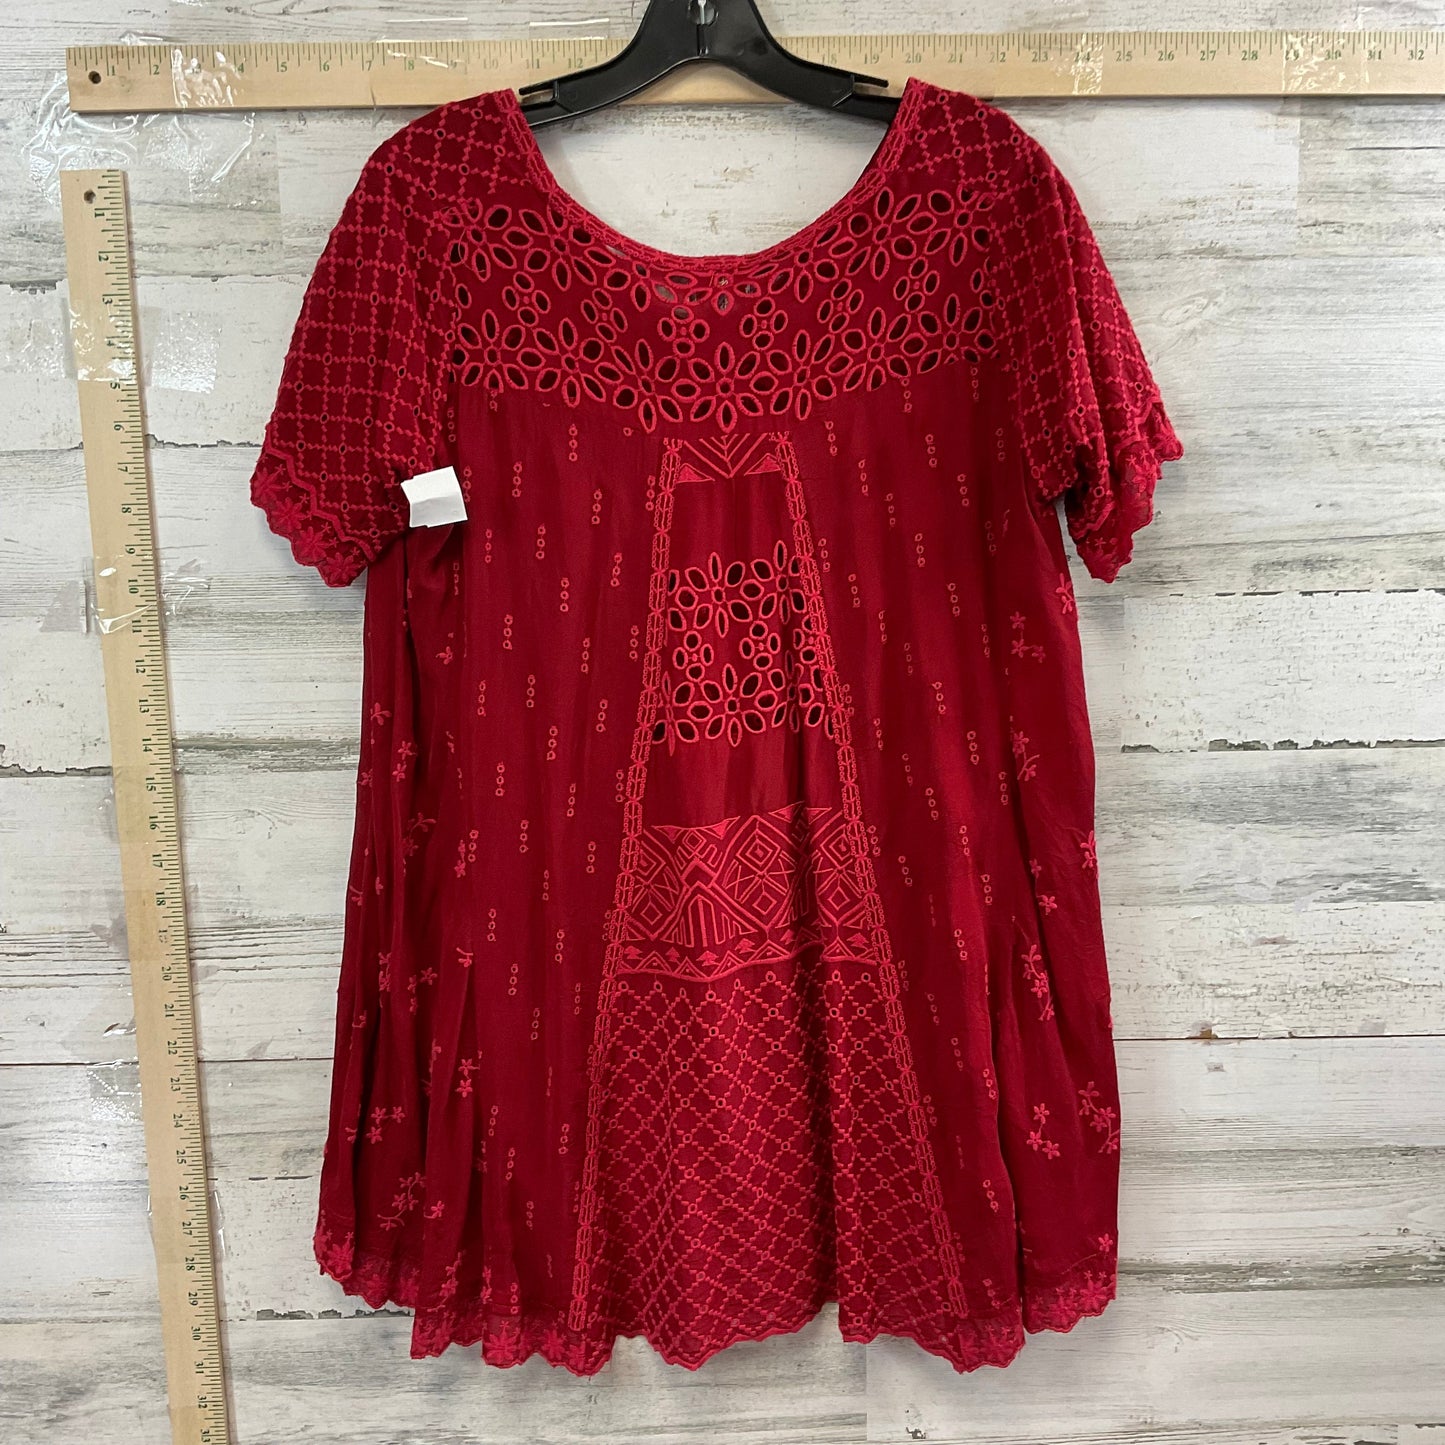 Red Top Short Sleeve Johnny Was, Size Xs